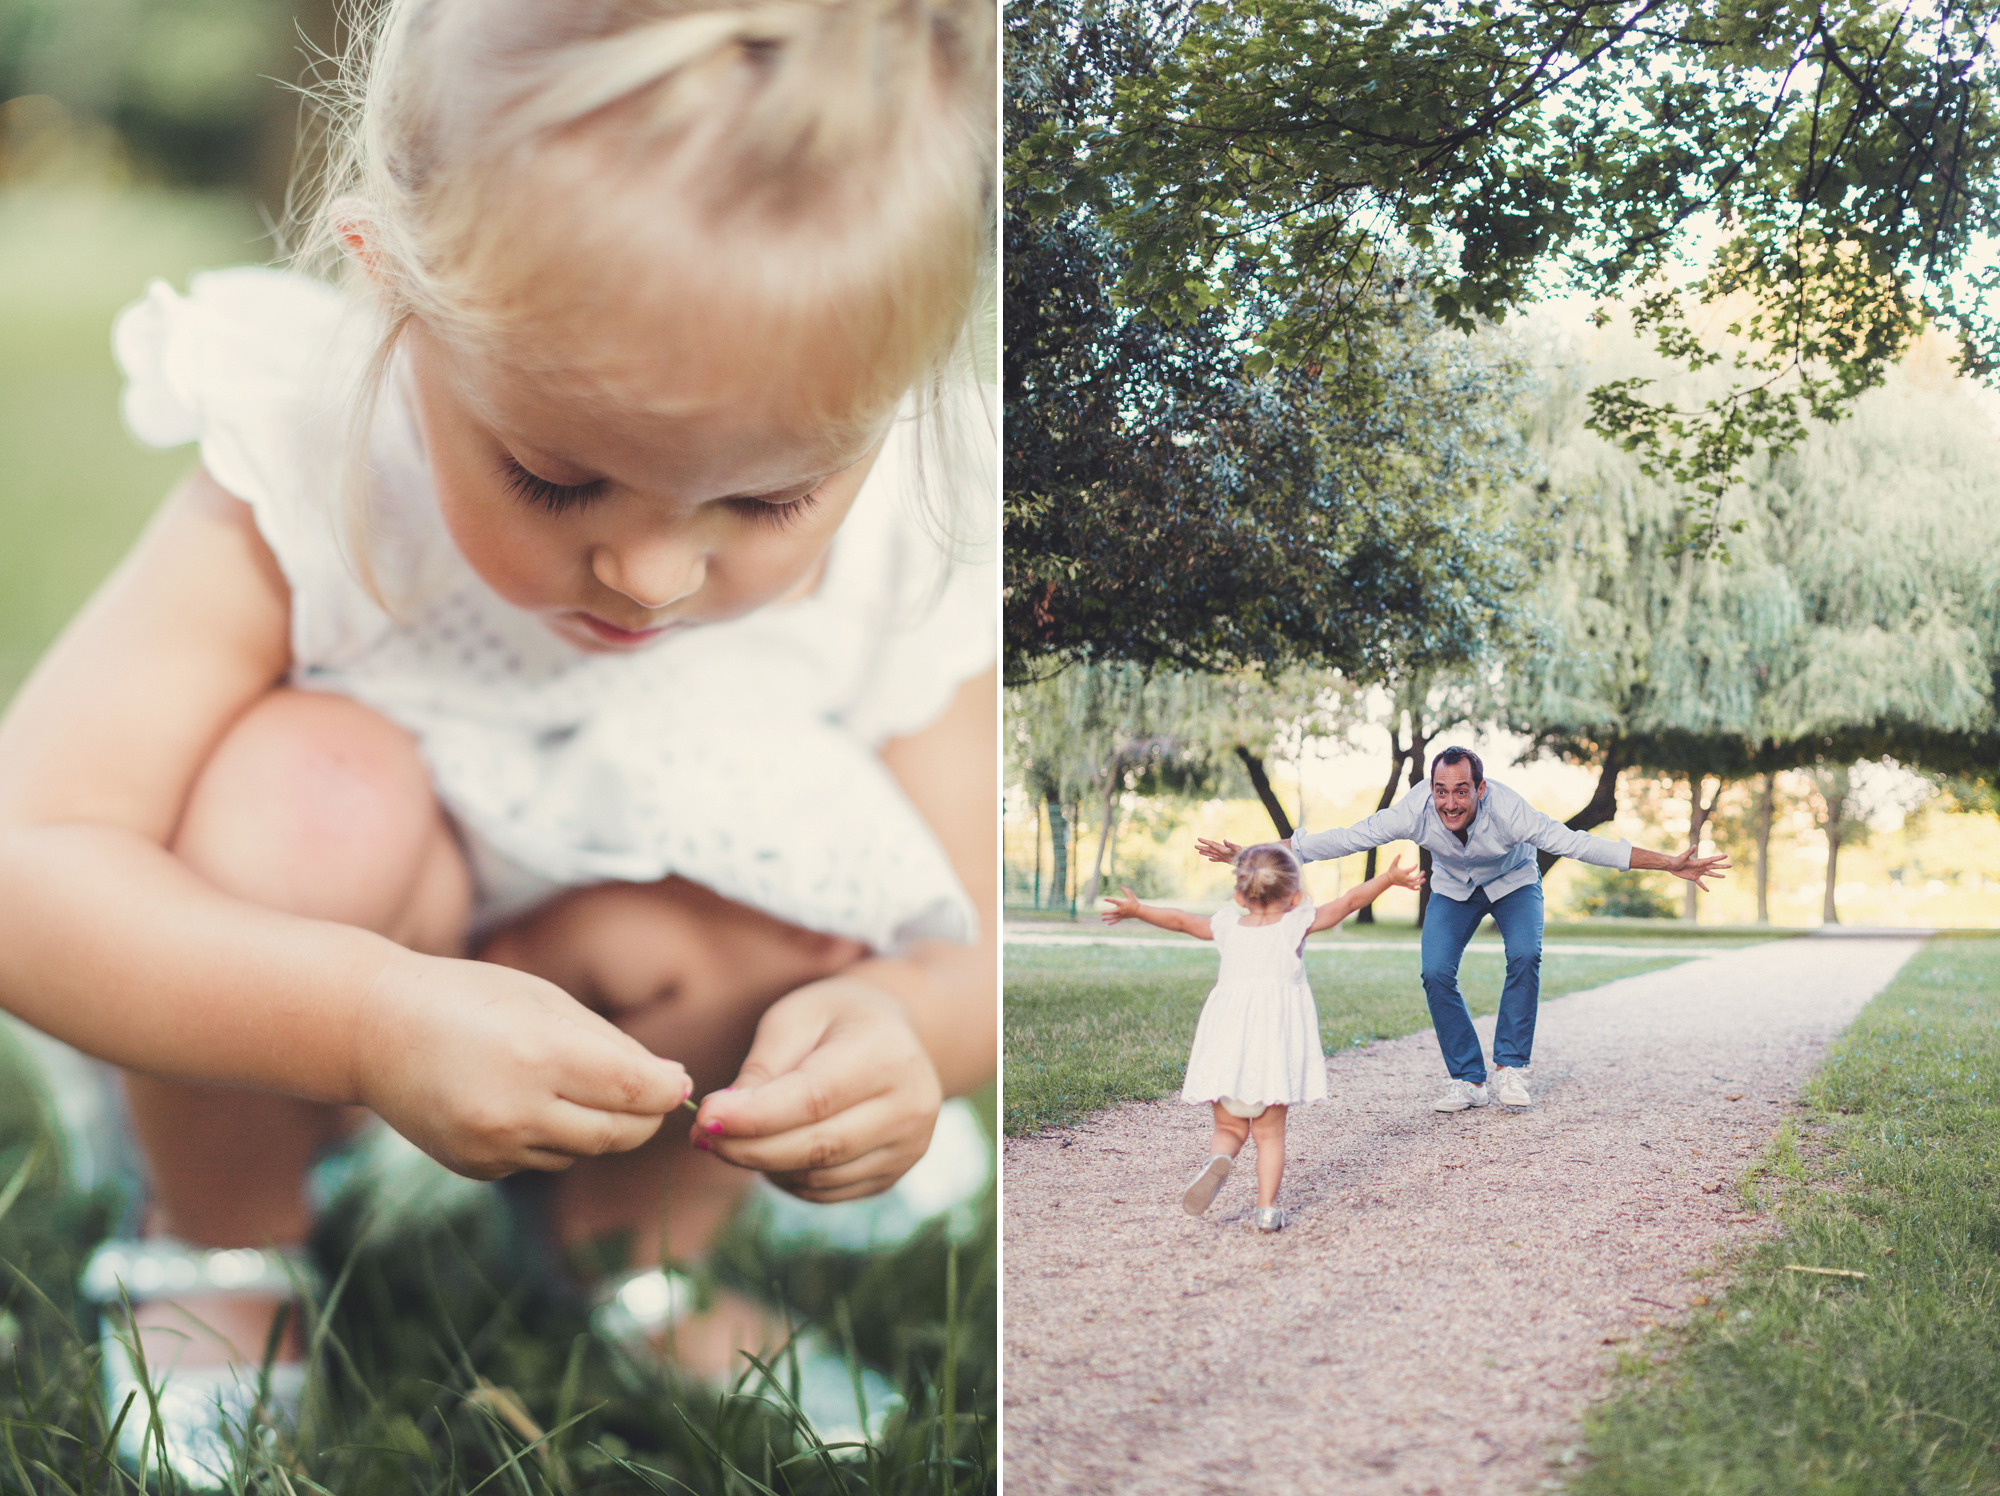 Family photographer Napa Valley @Anne-Claire Brun 0049